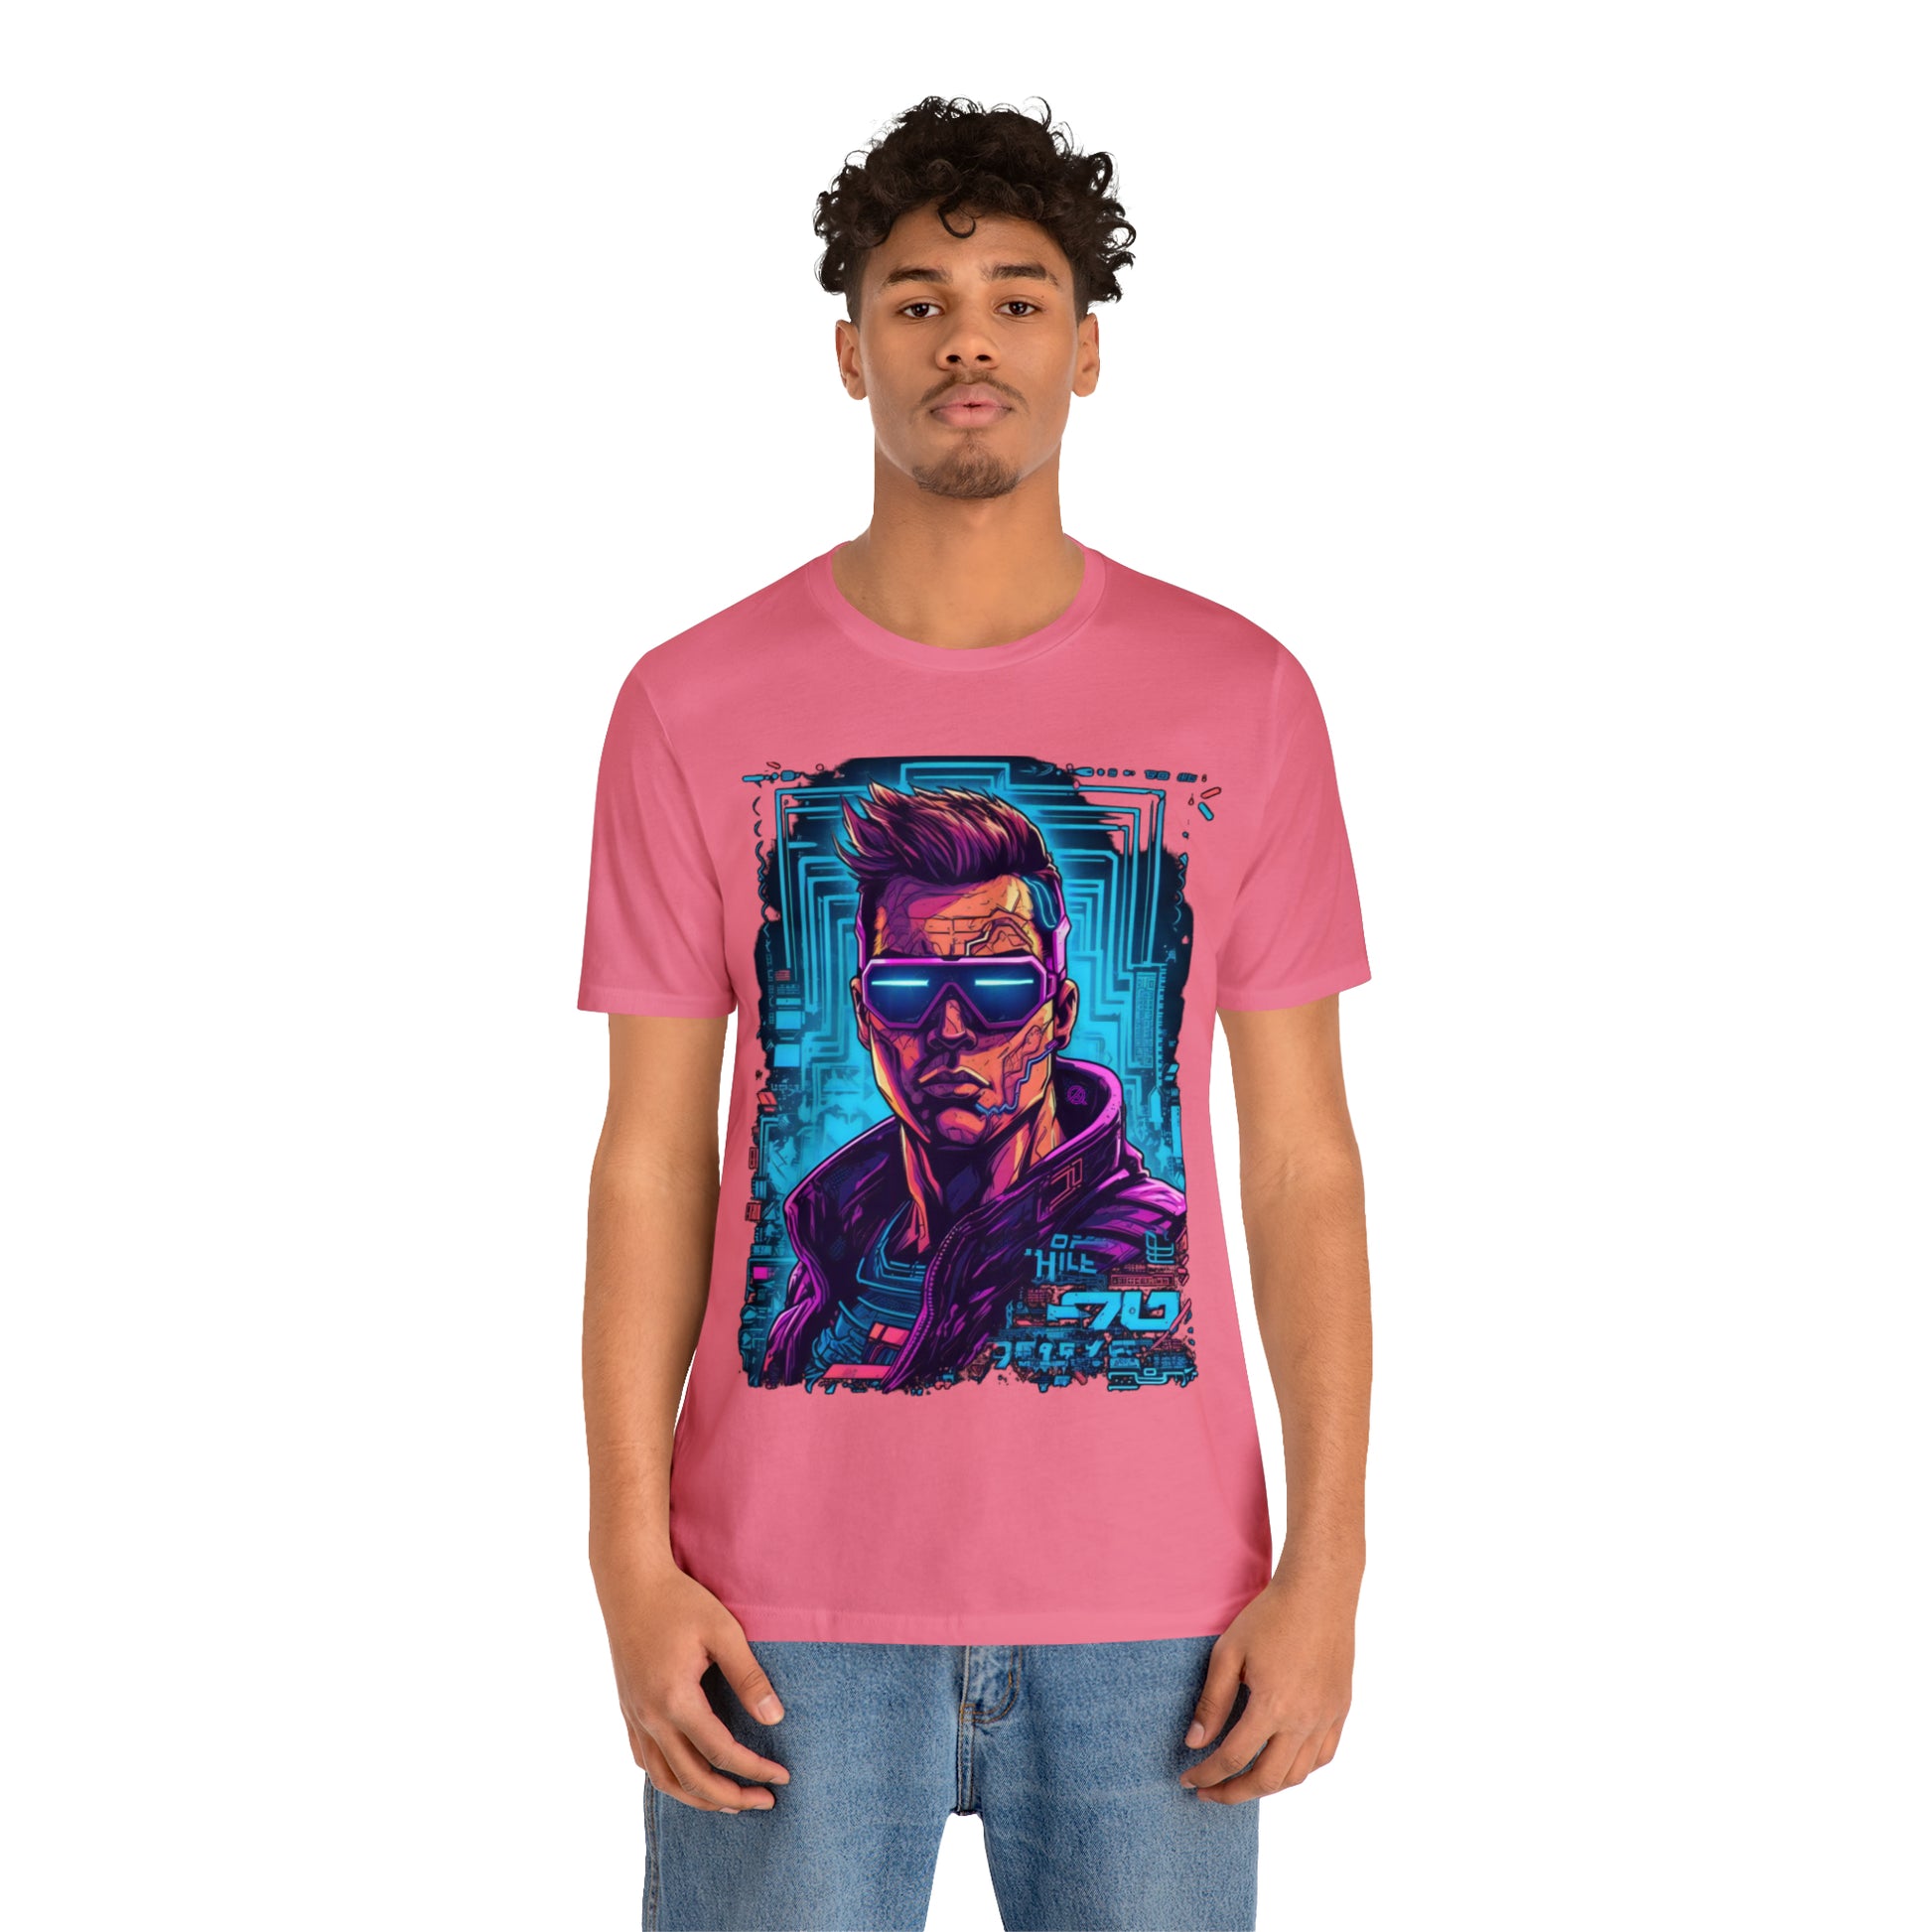 charity-pink-quest-thread-tee-shirt-with-large-neon-cyber-punk-on-center